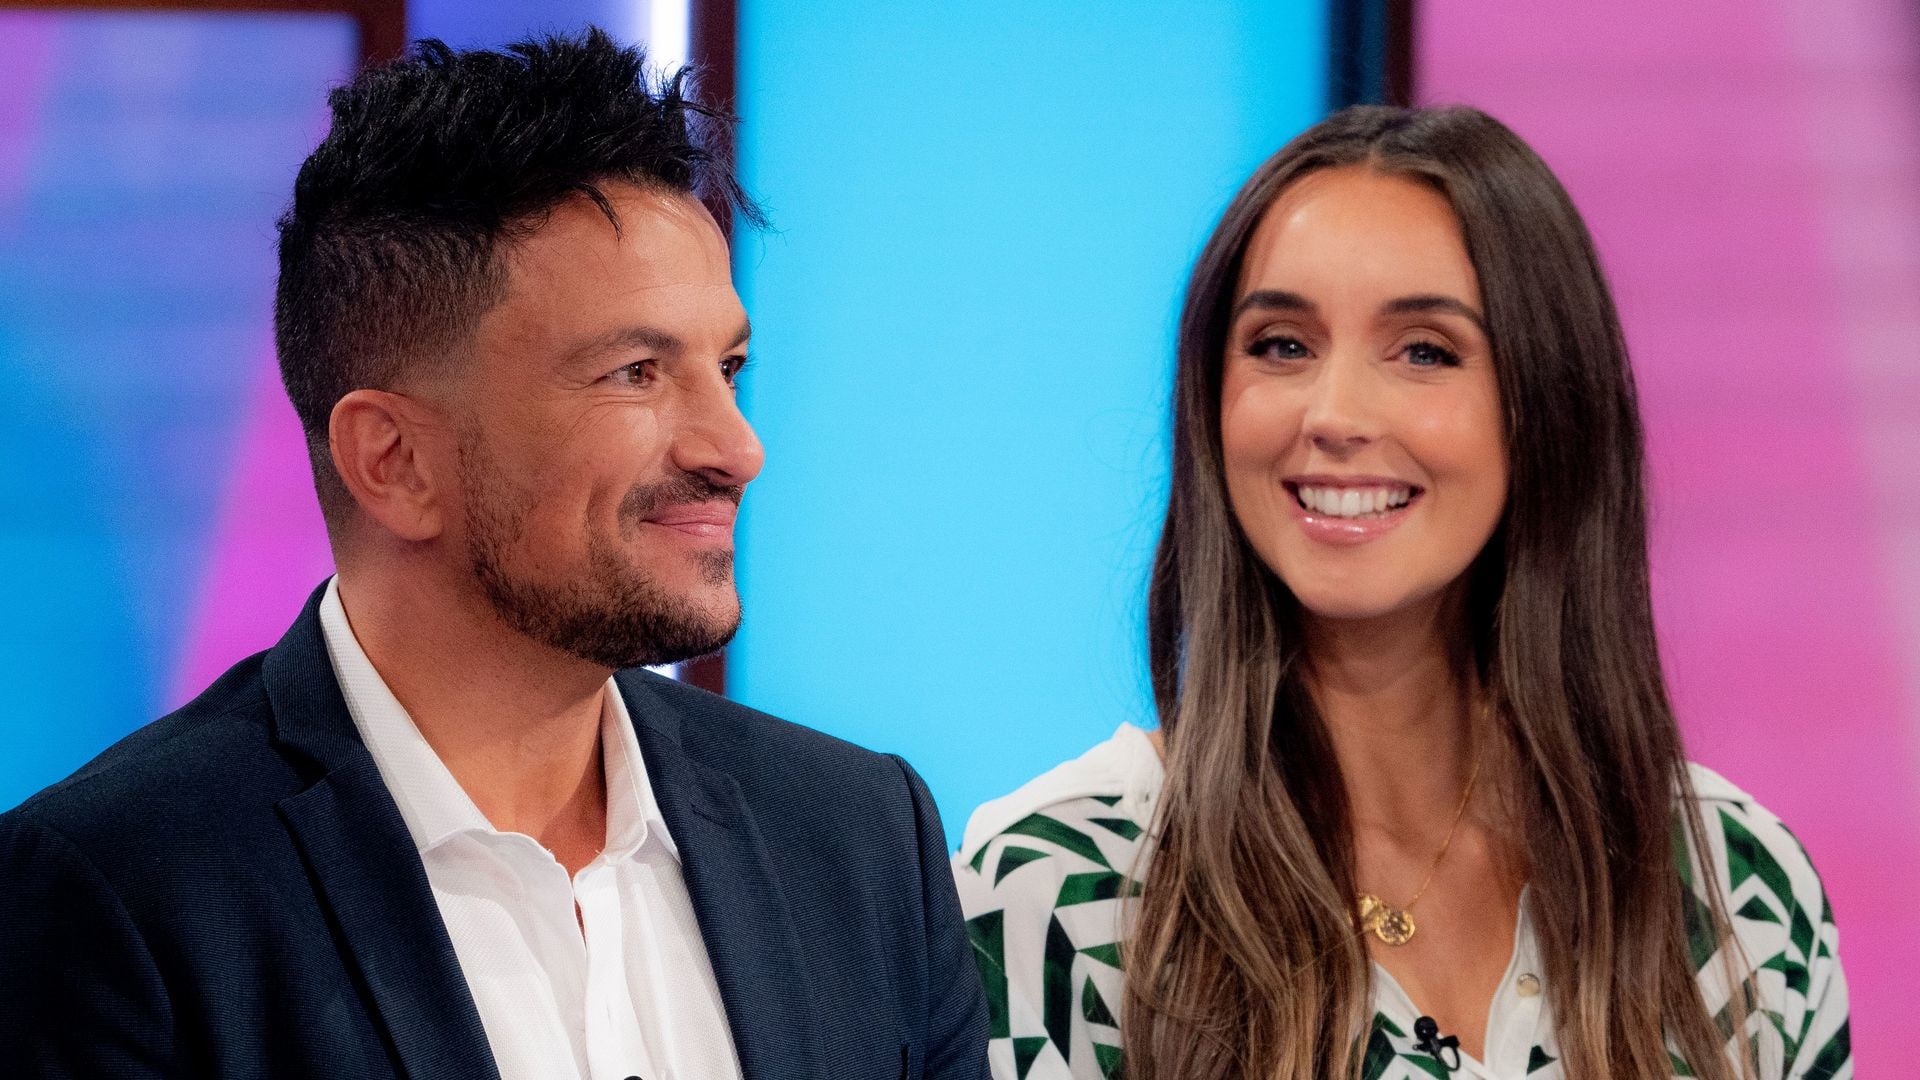 Peter Andre and wife Emily Andre